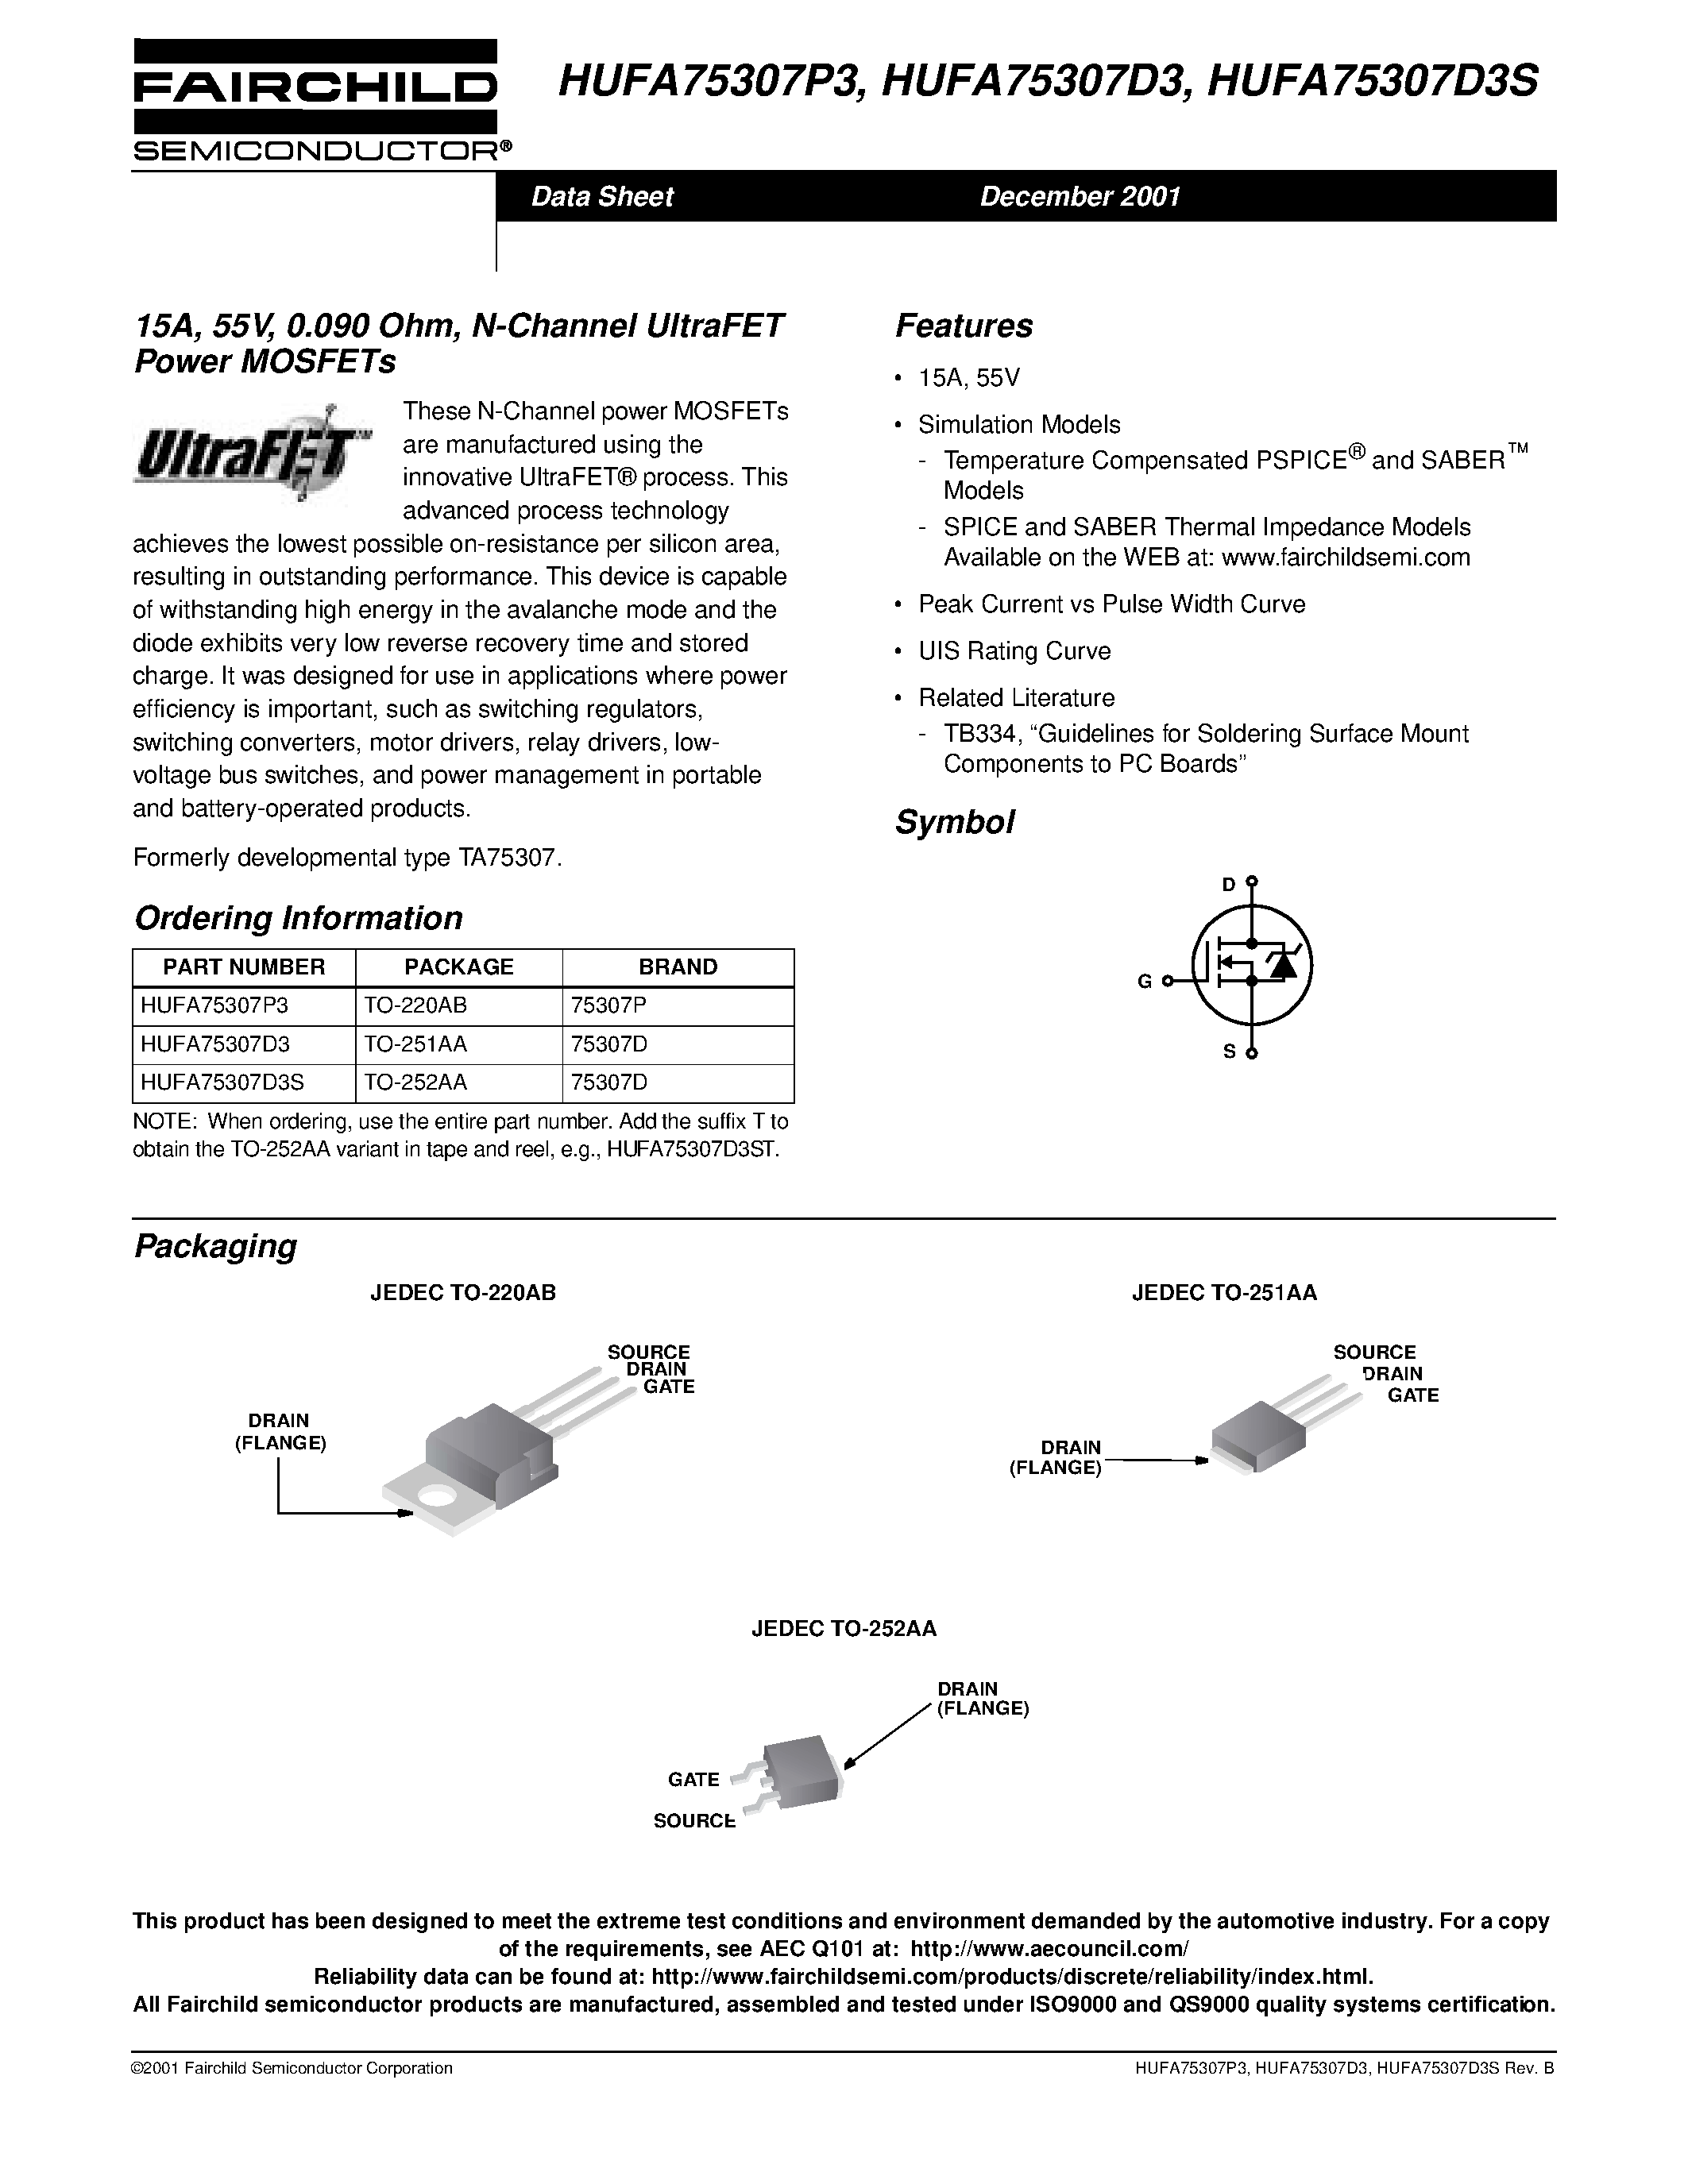 Datasheet HUFA75307D3 - 15A/ 55V/ 0.090 Ohm/ N-Channel UltraFET Power MOSFETs page 1